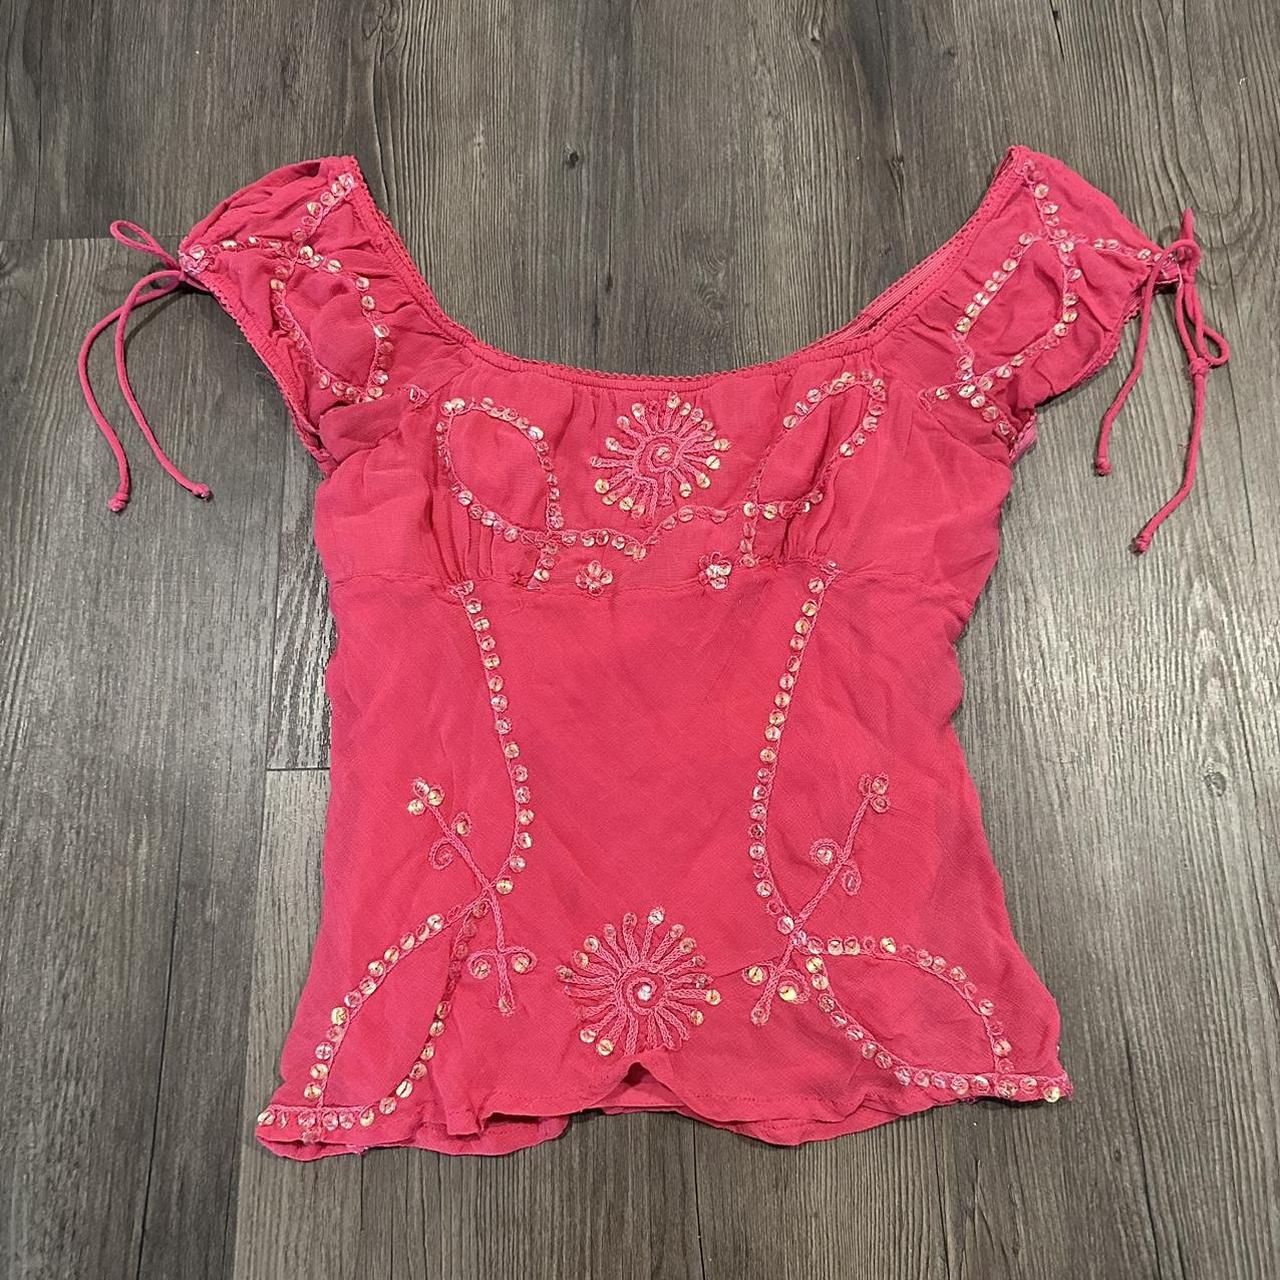 Charlotte Russe Women's Pink Blouse